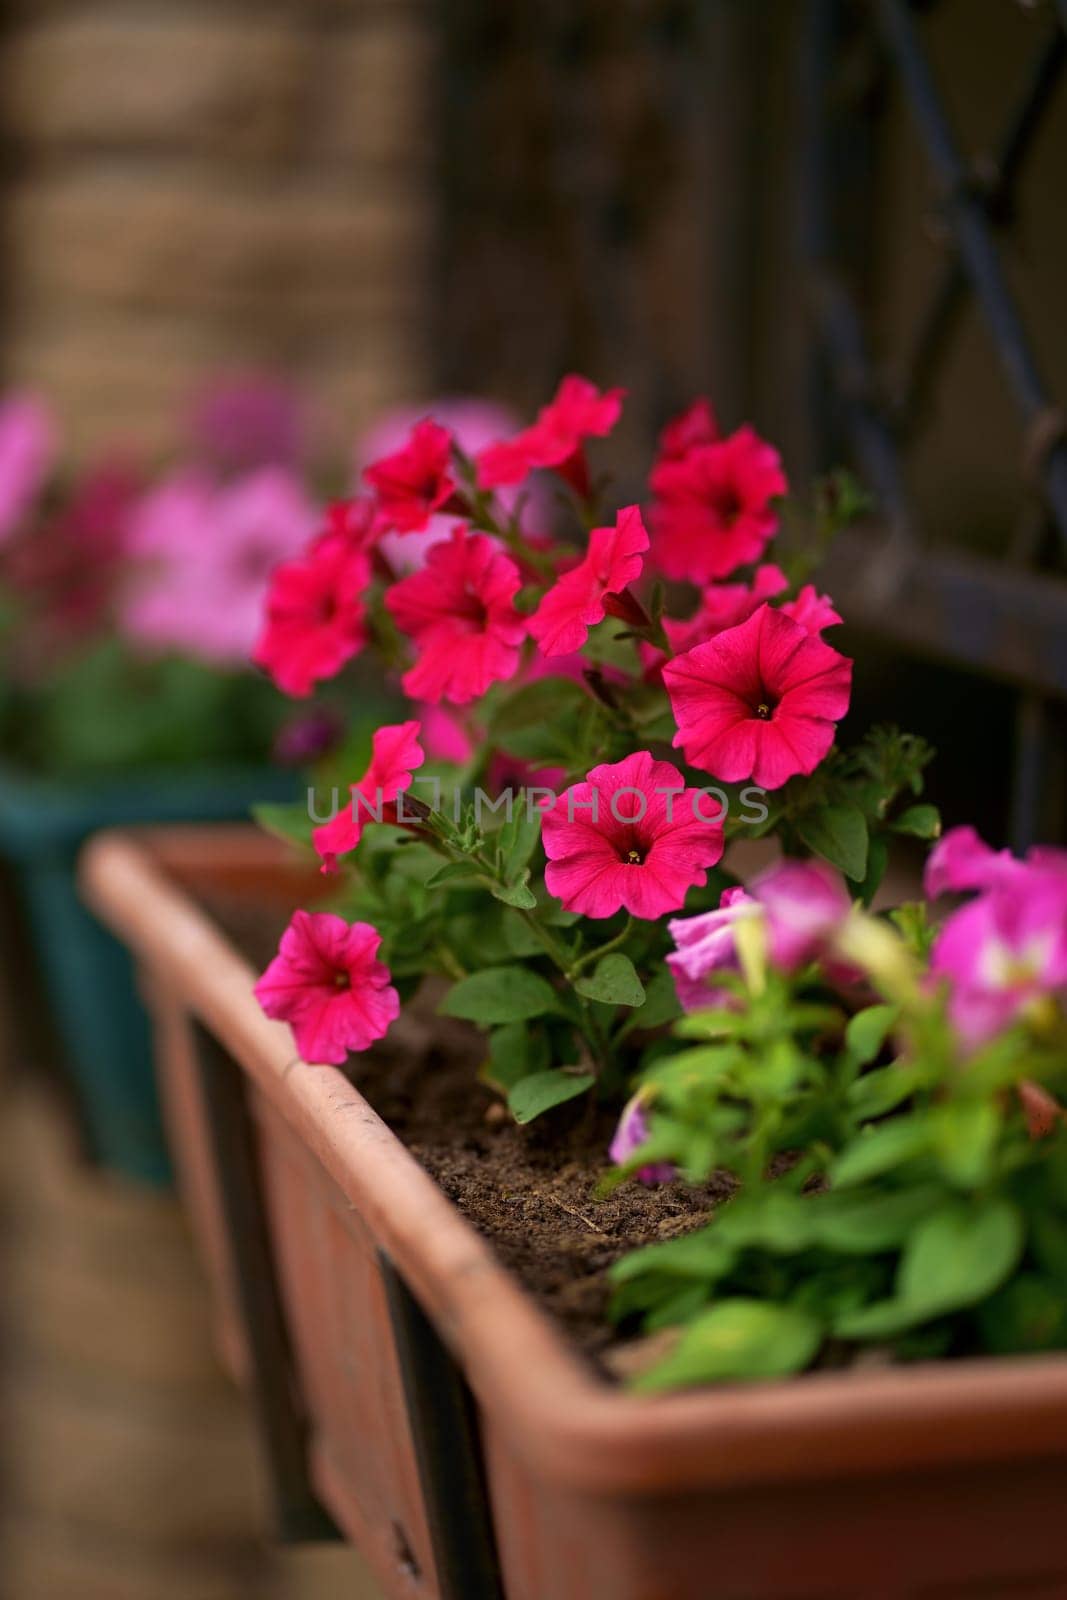 Petunia sprouts in a box. Red petunias bloom in a hanging pot in July in the private yard by aprilphoto